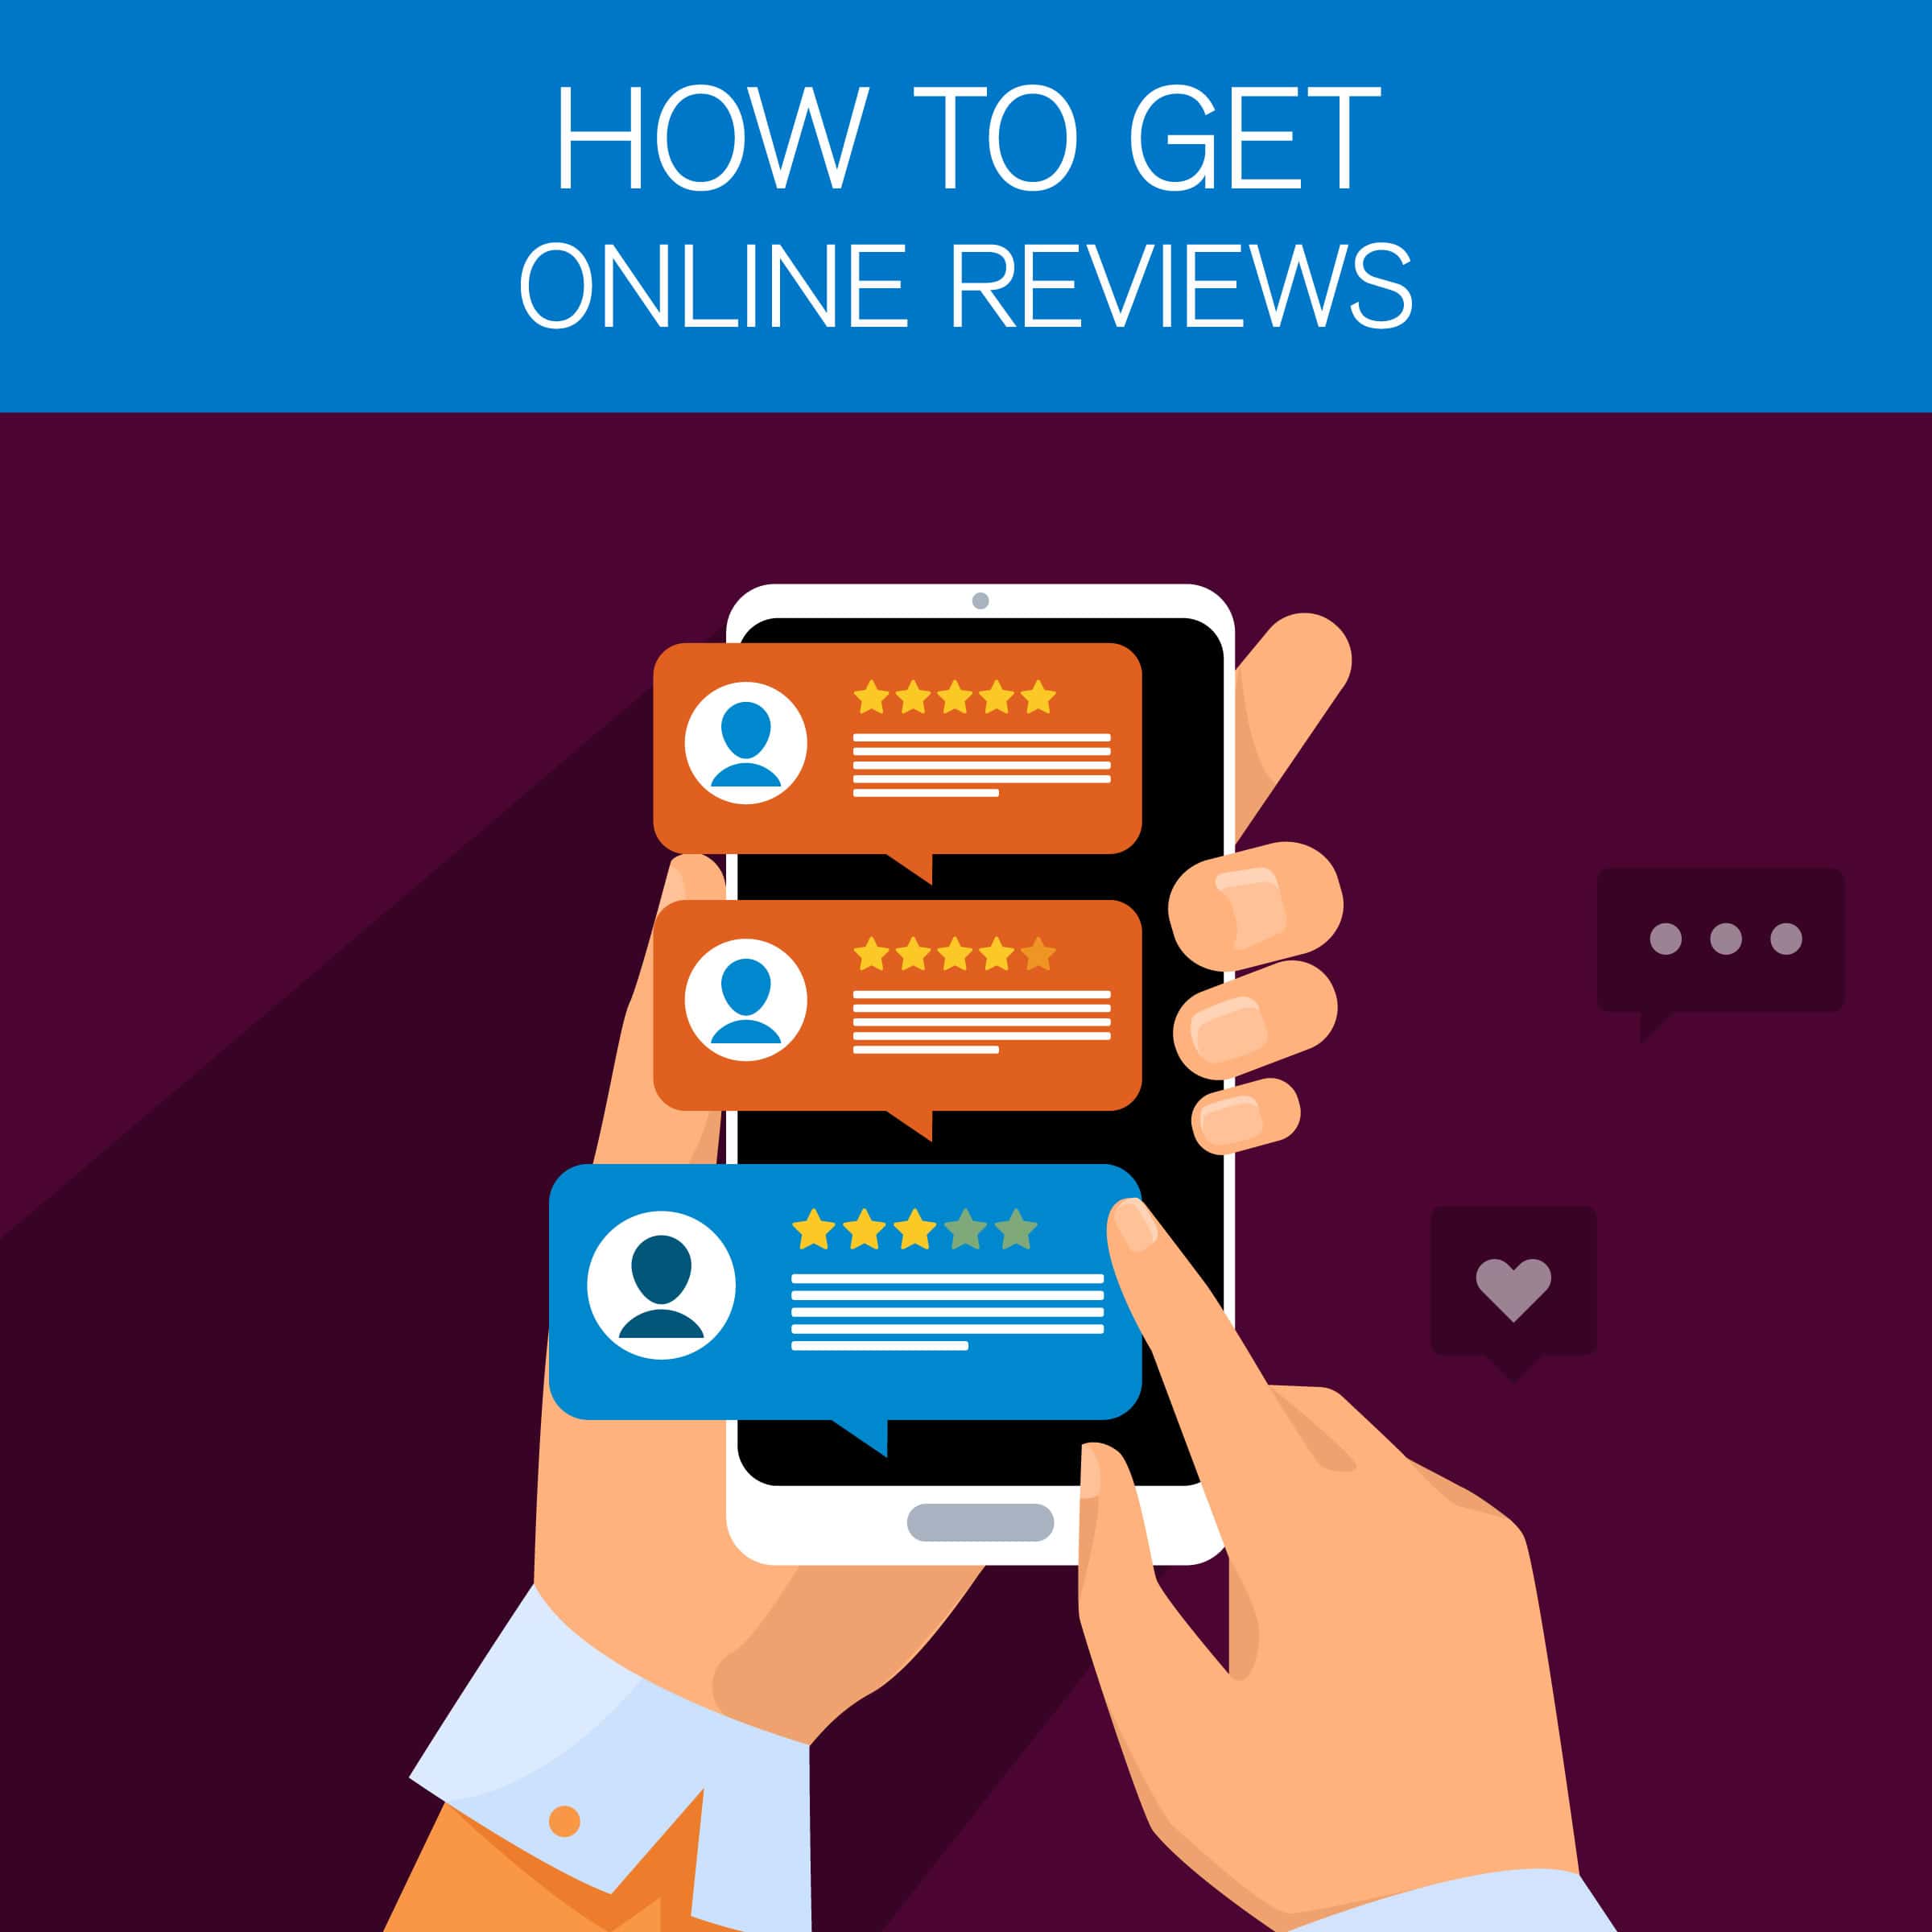 How to Get Online Reviews